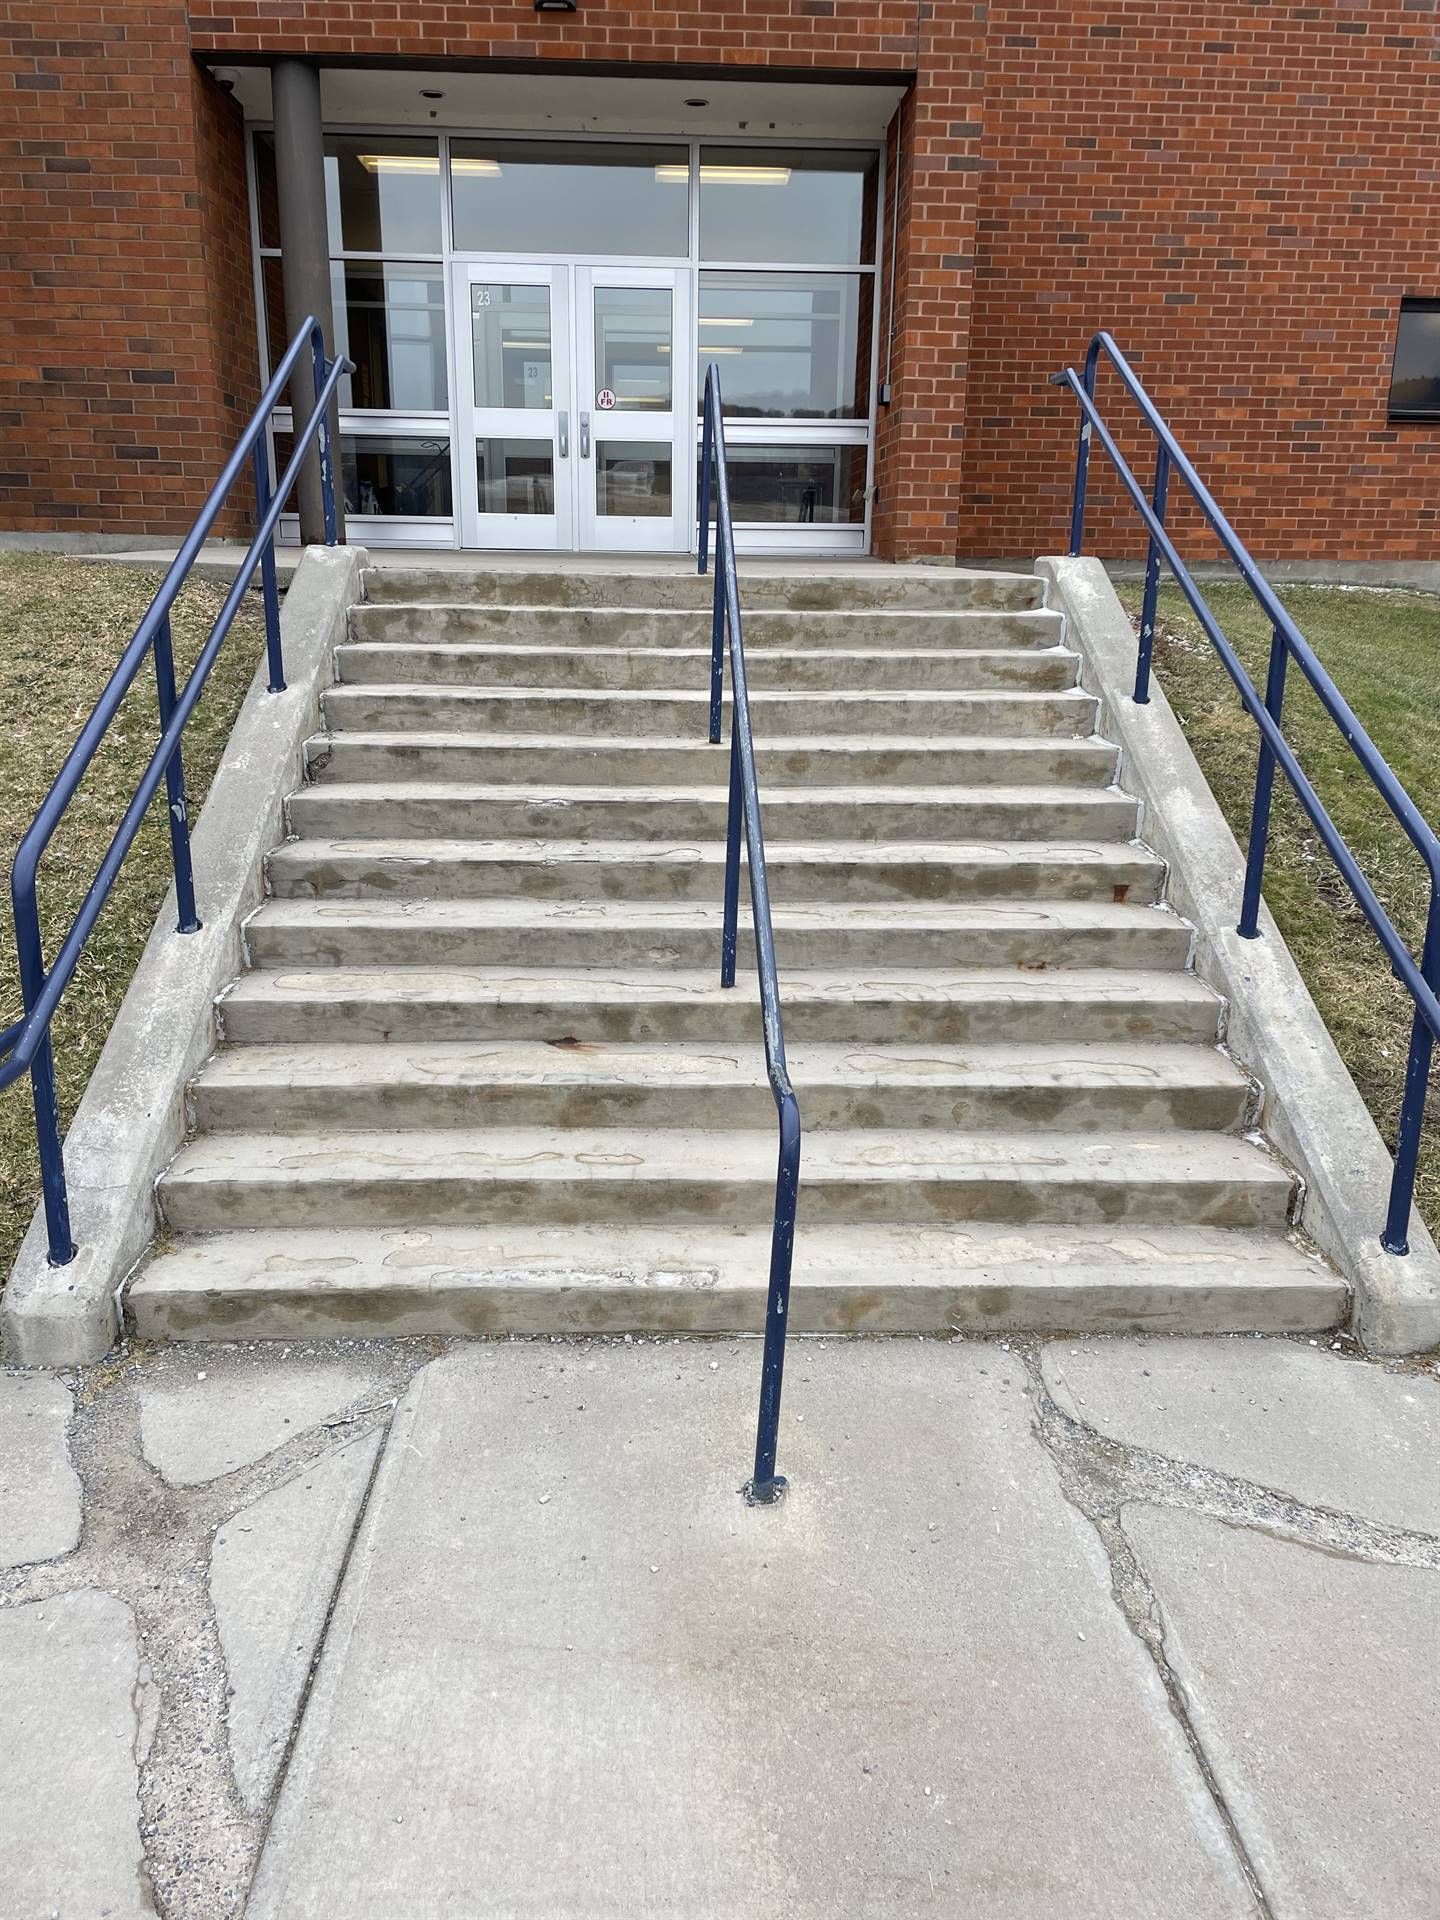 Elementary entrance stairwell